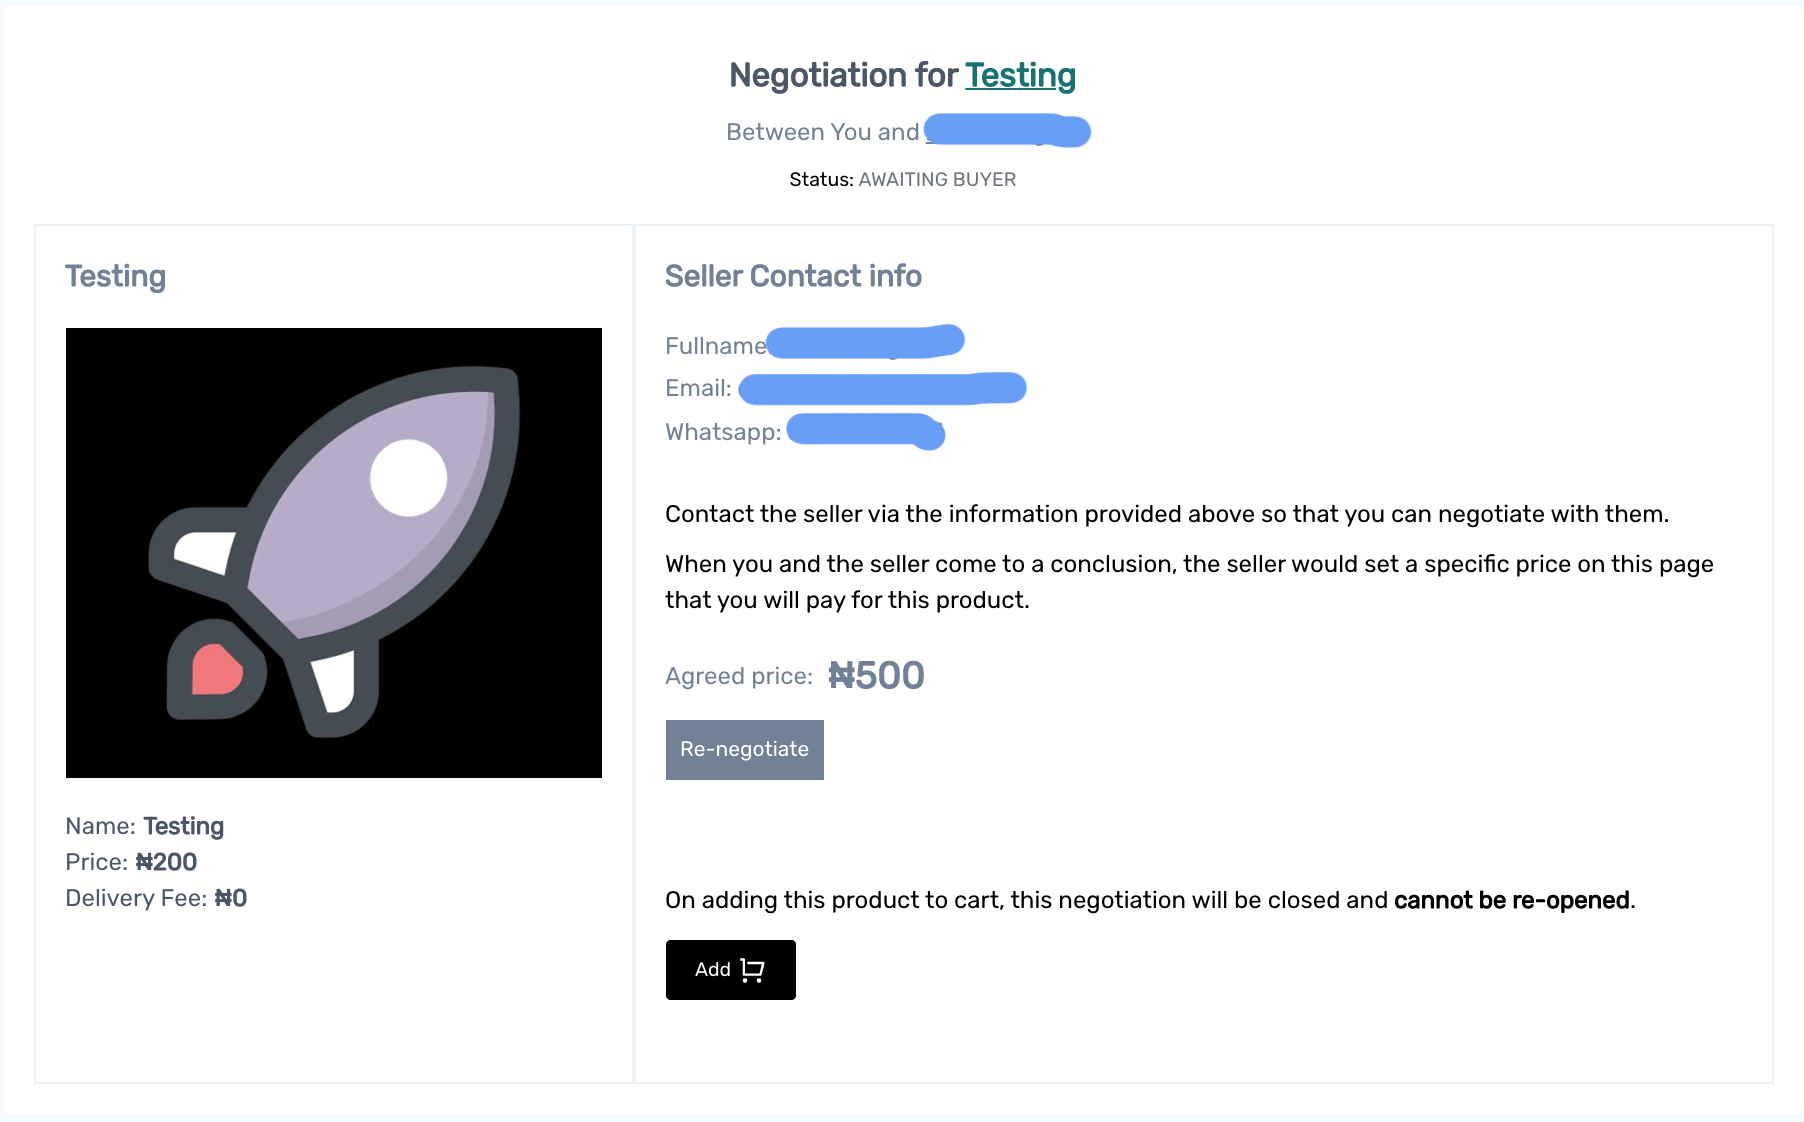 Screenshot of the updated buyer's negotiation page